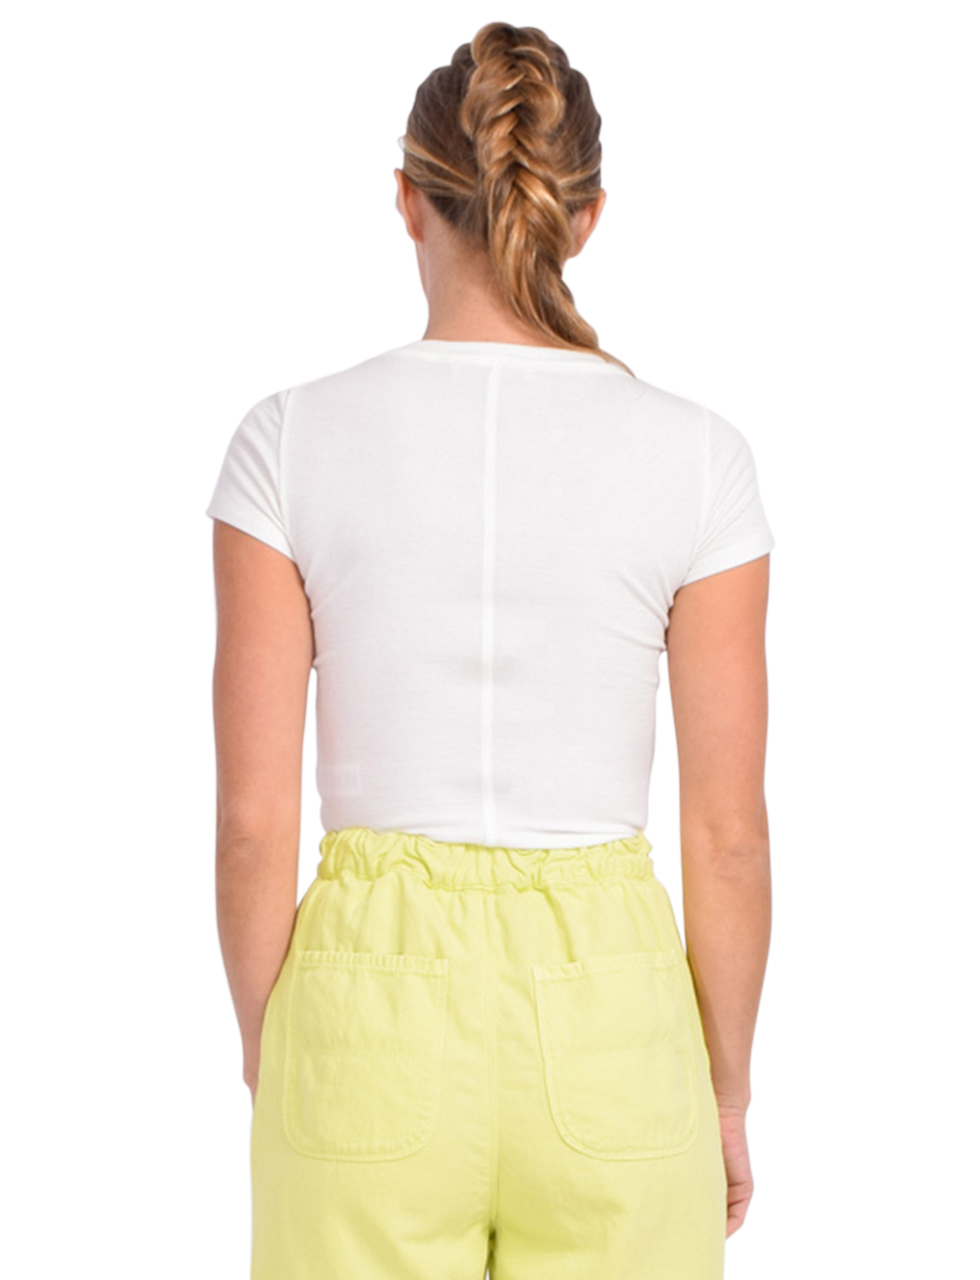 FRAME Rib Baby Tee in White Back View 